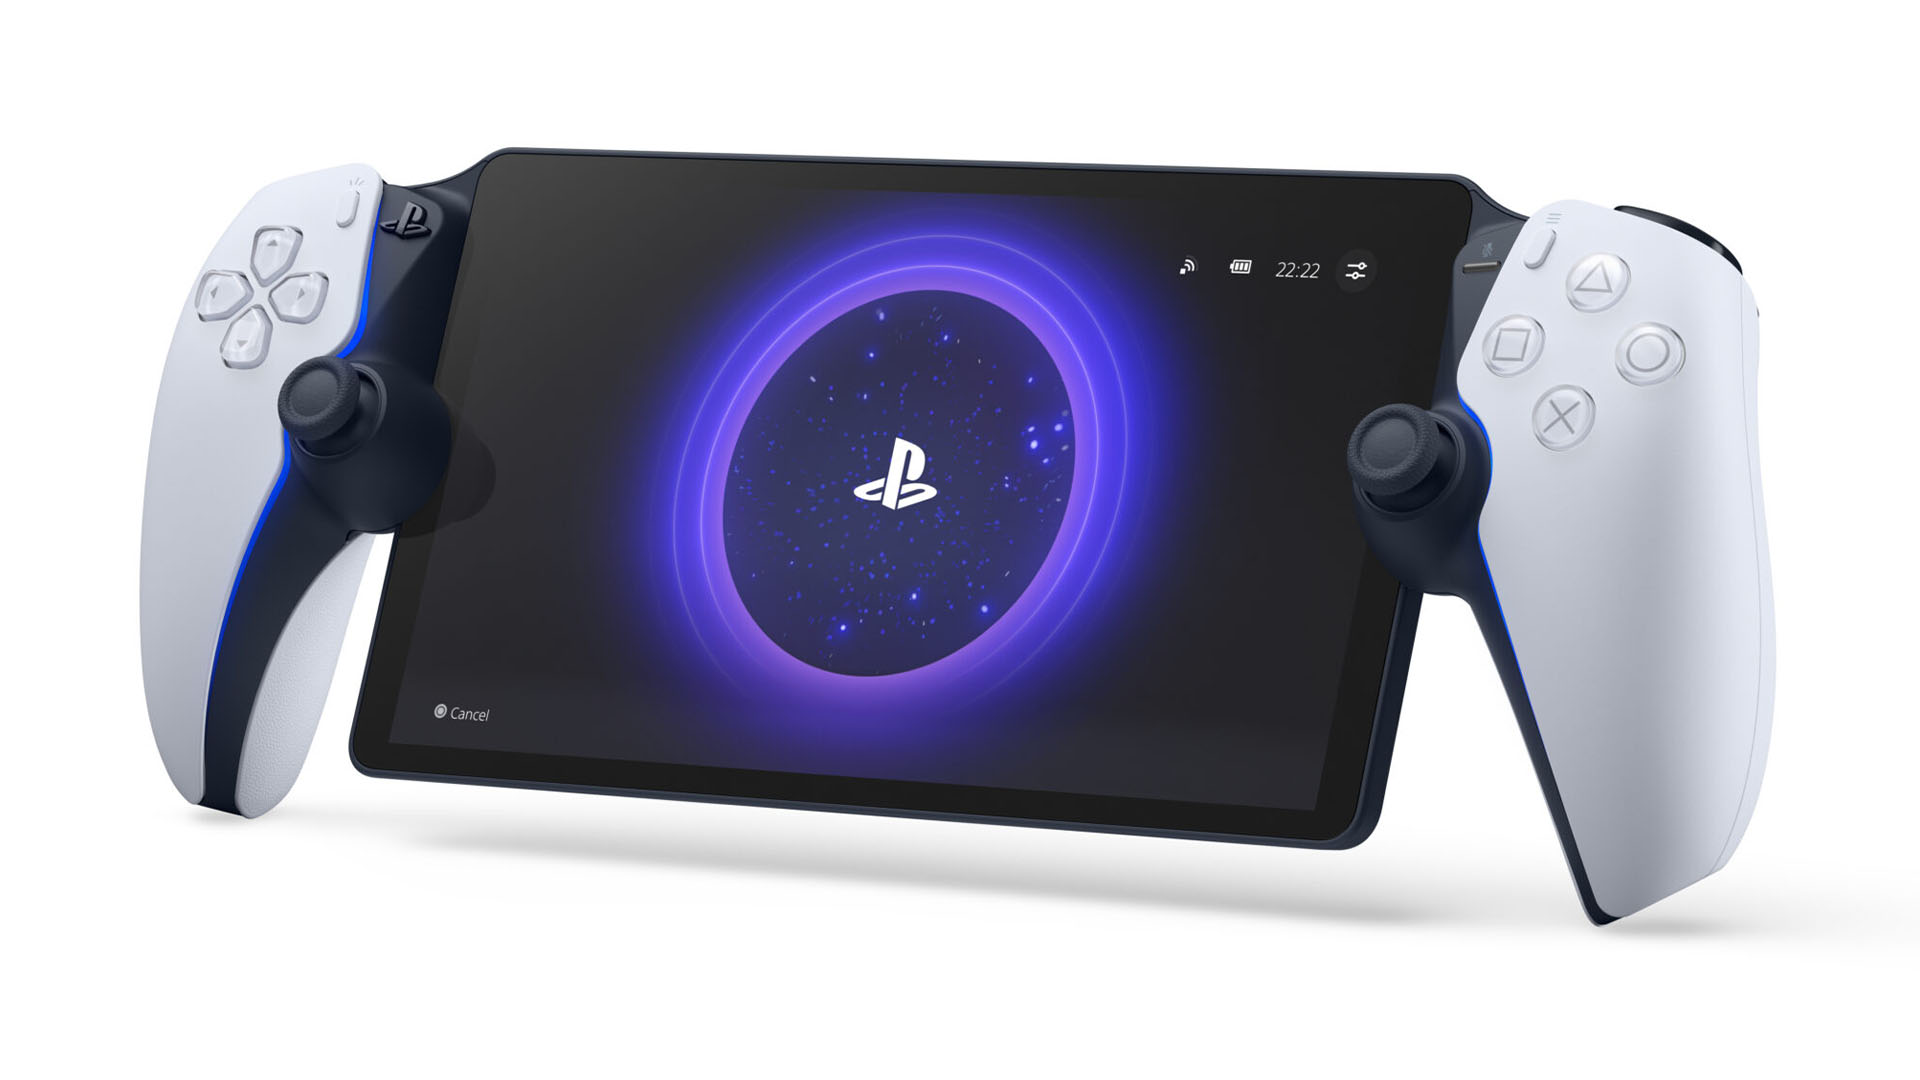 Nacon's new PS5 pro controller launches in December for $199